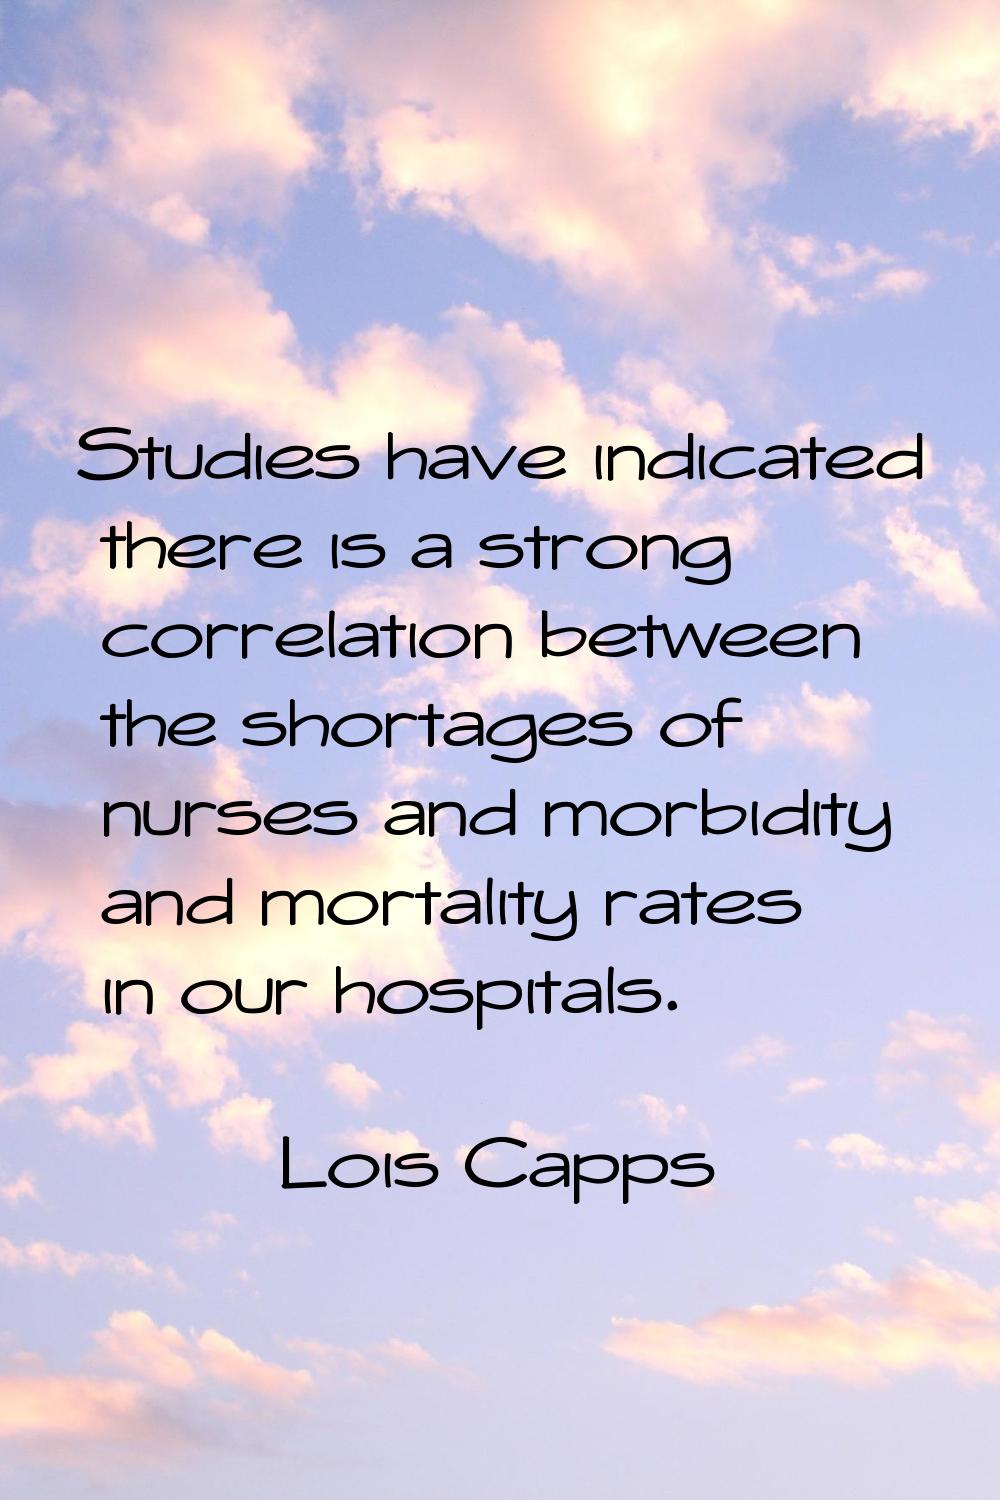 Studies have indicated there is a strong correlation between the shortages of nurses and morbidity 